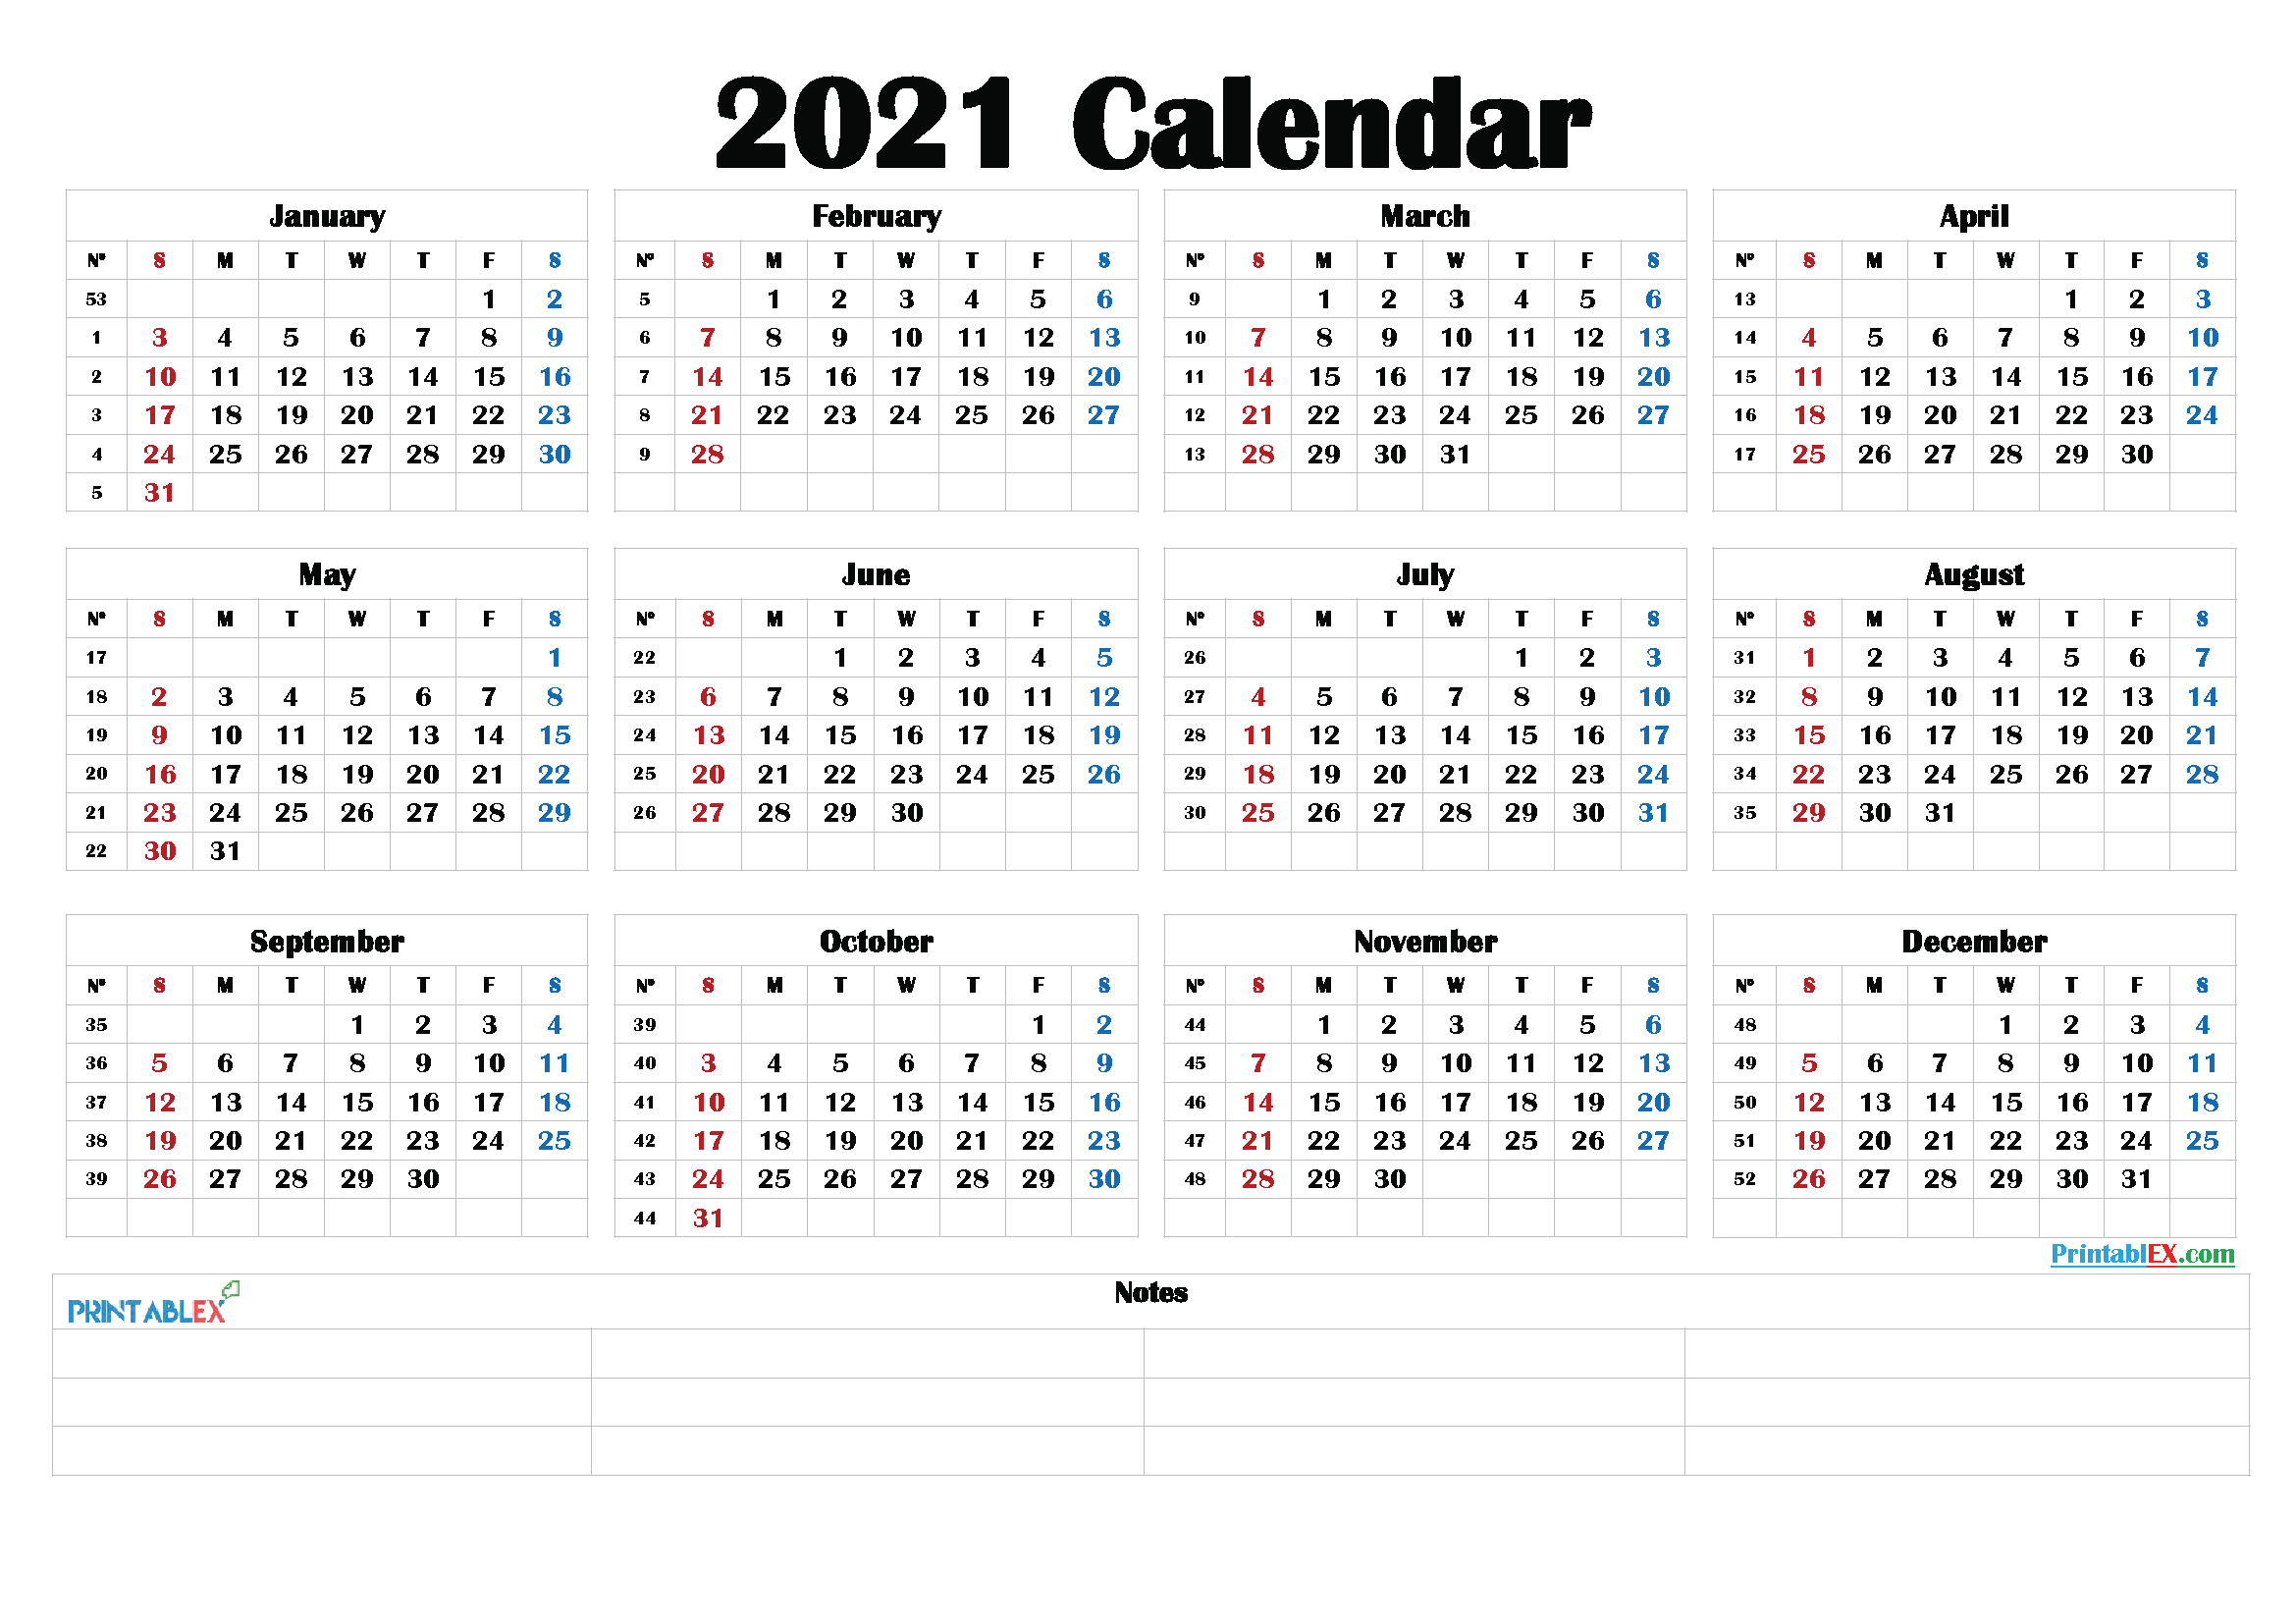 Free 2021 Yearly Calender Template : 2021 Printable Yearly-2021 Yearly Calendar Printable Free With Notes